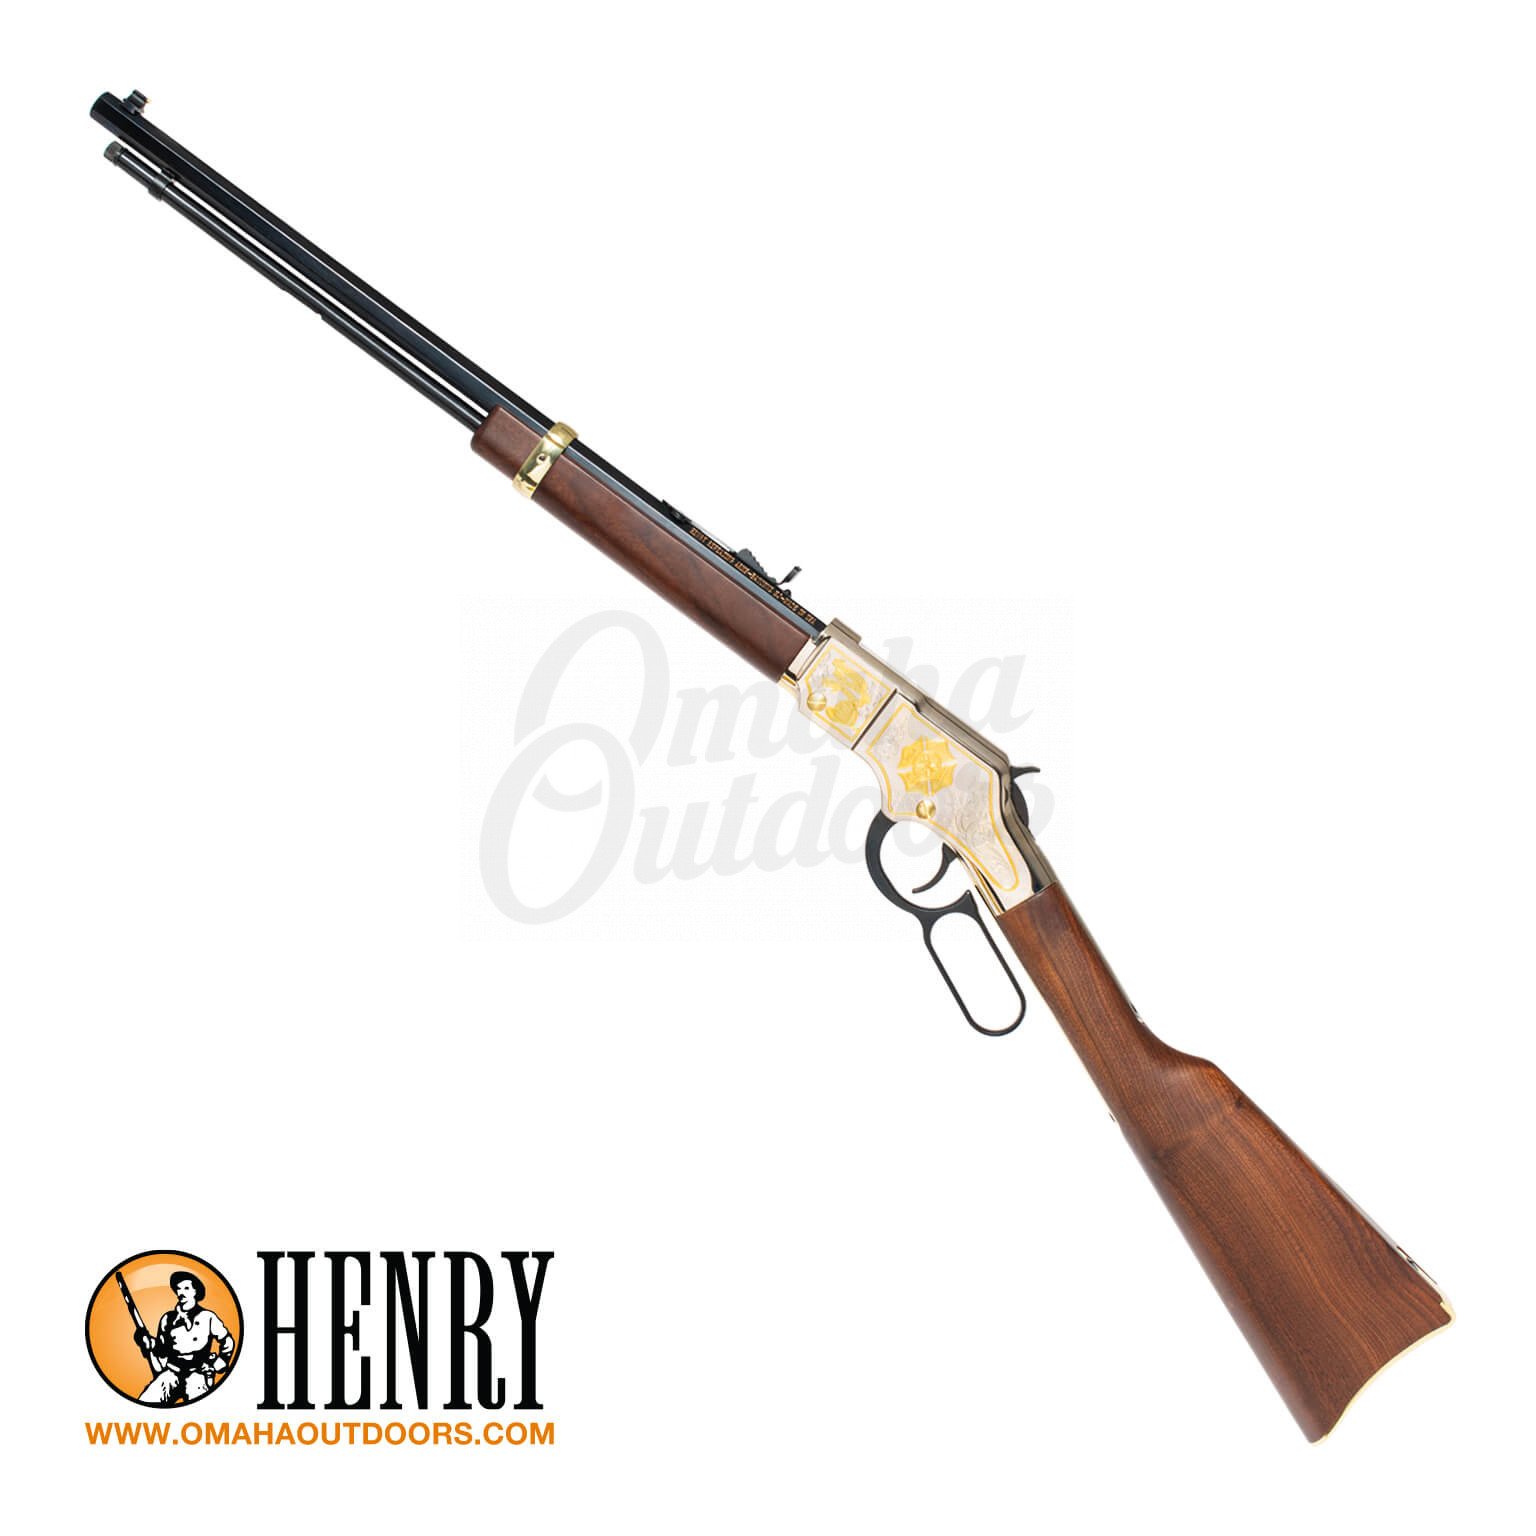 Henry Golden Boy Firefighter Tribute Edition 16 Rd 22 Lr Lever Action Rifle Omaha Outdoors